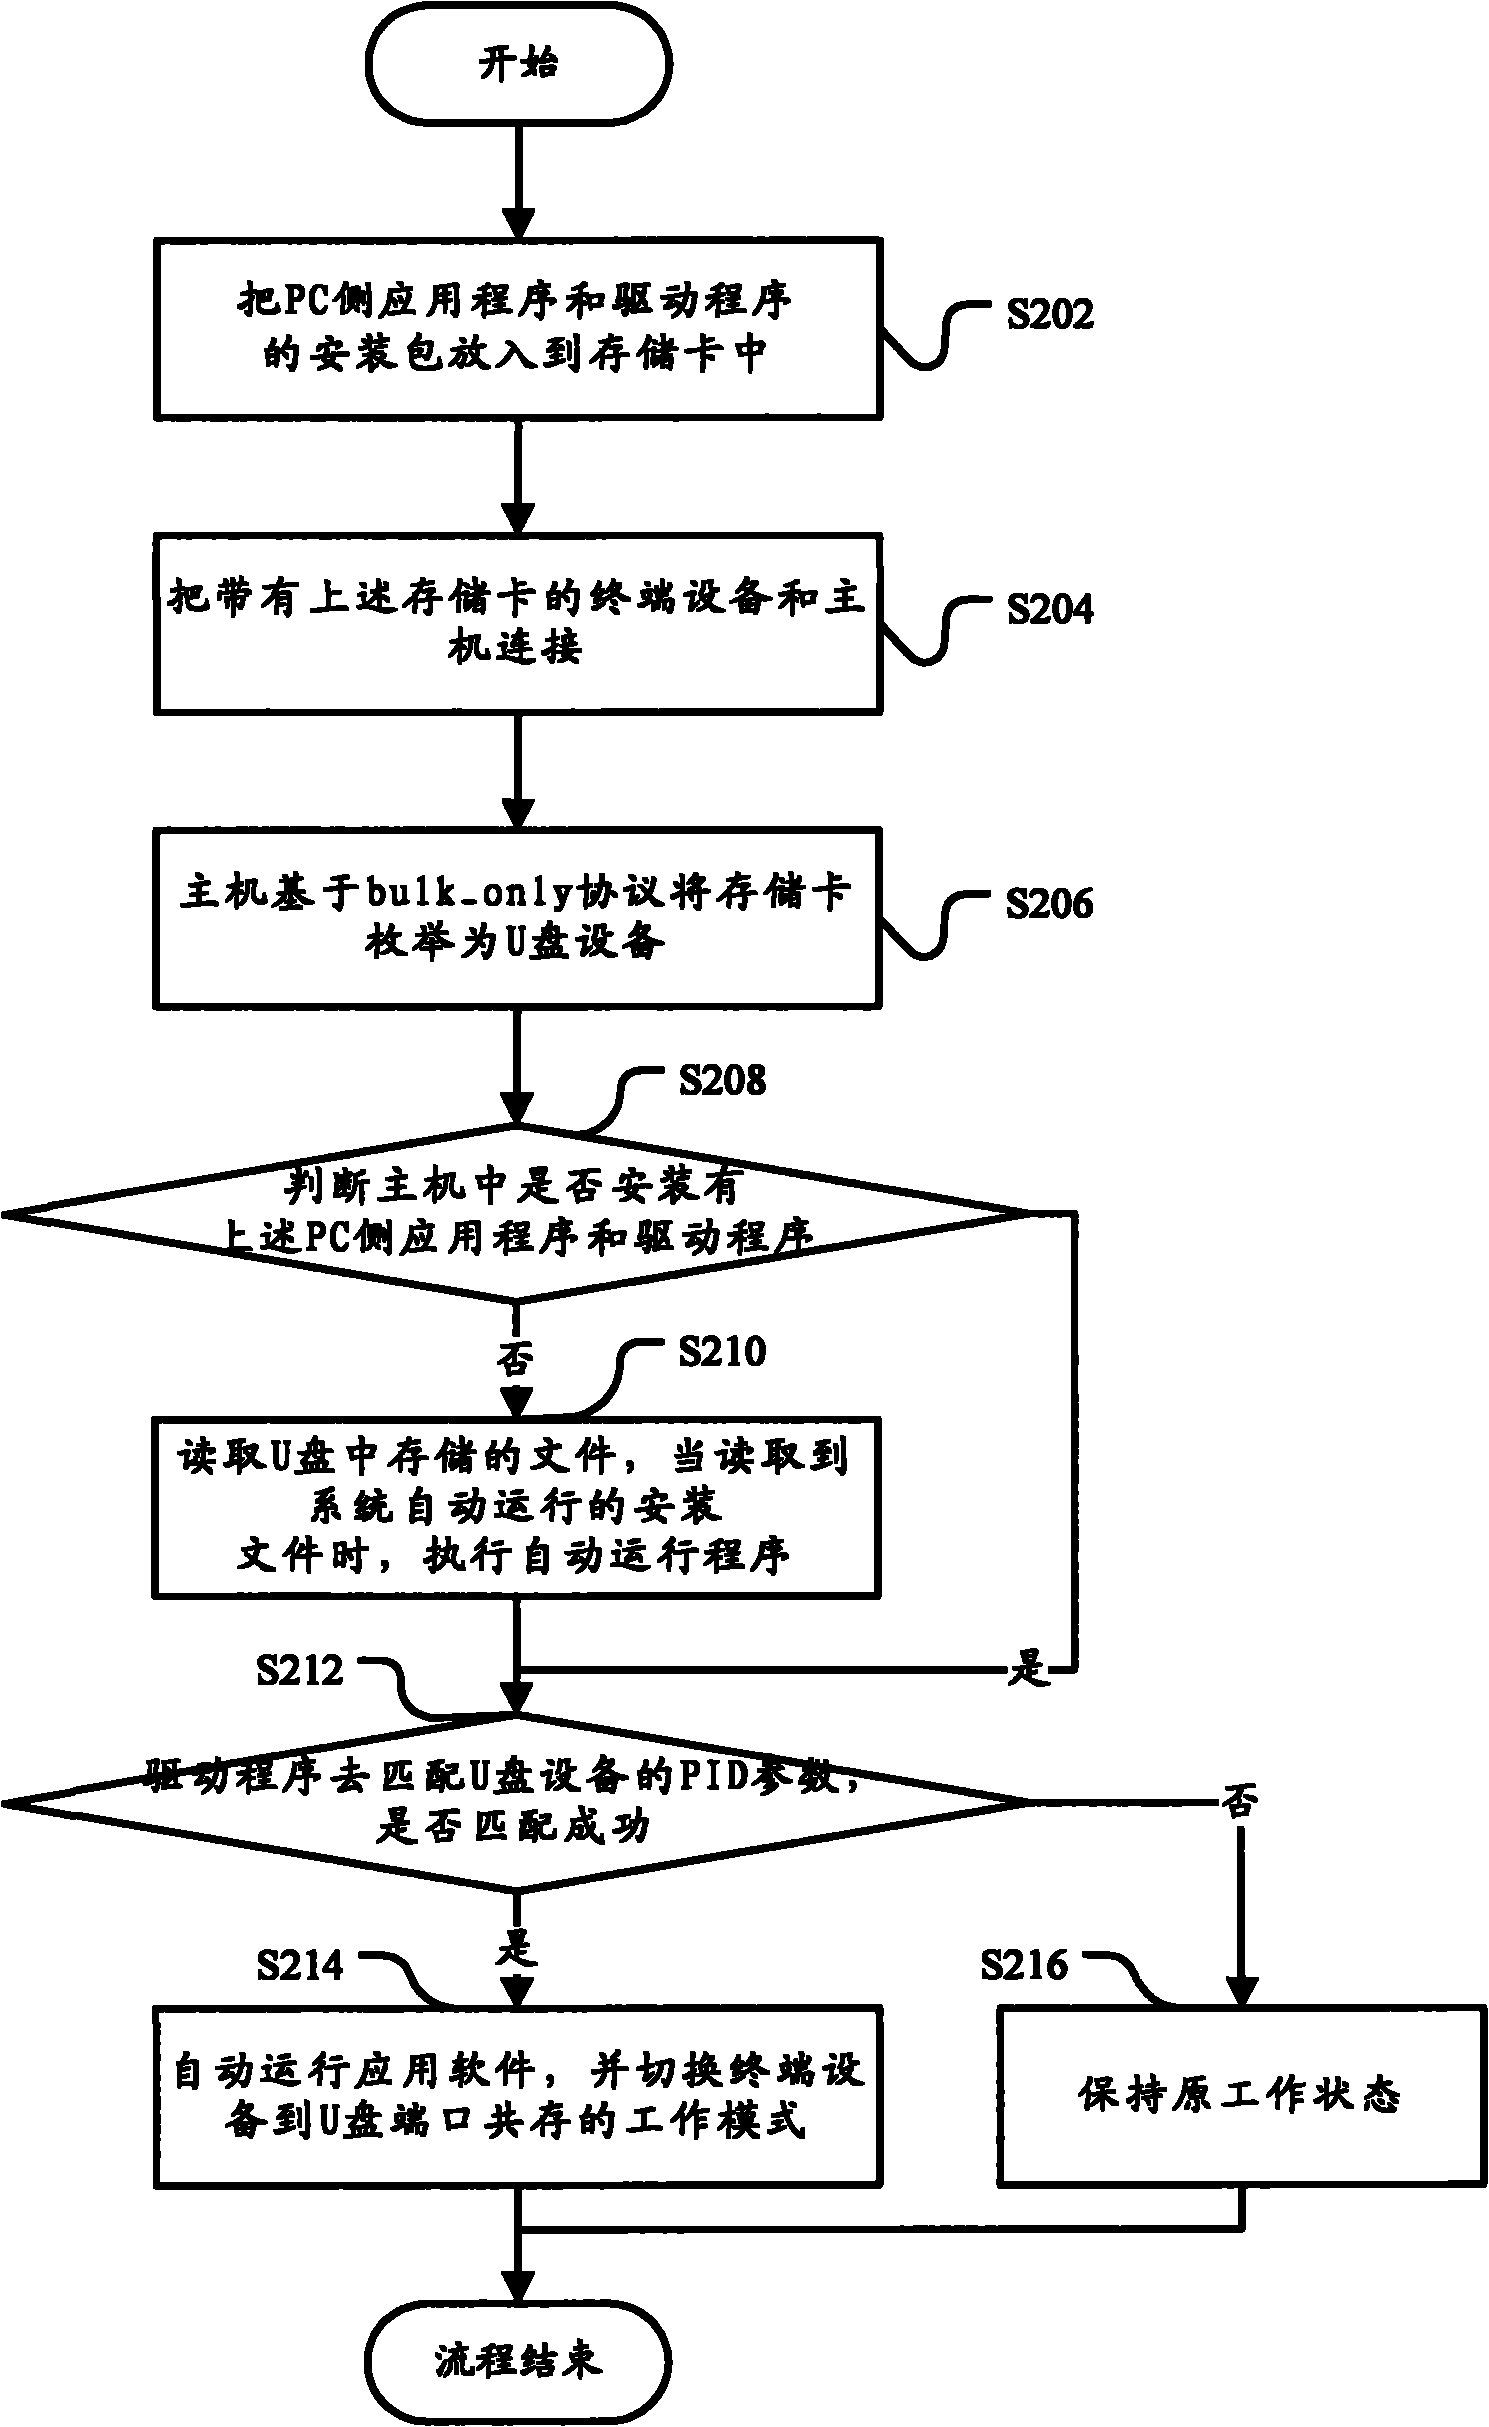 Method and system for installing terminal equipment